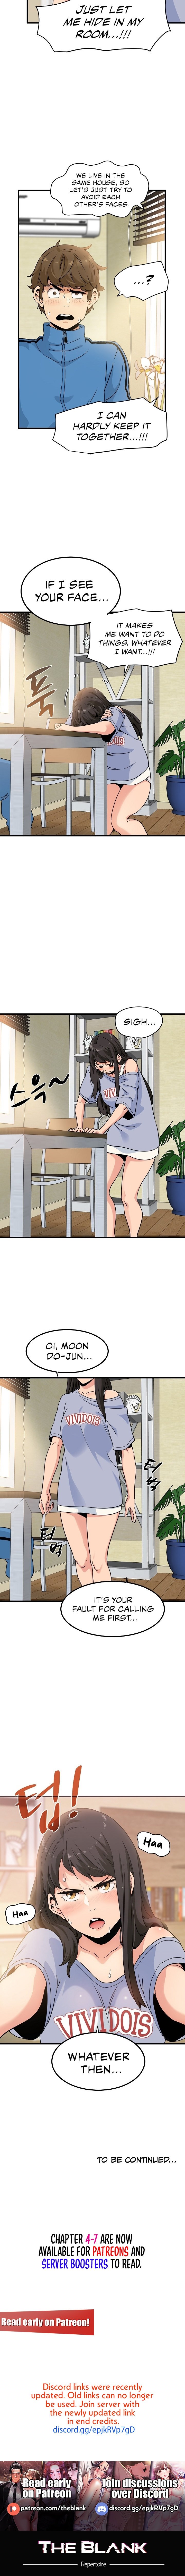 a-turning-point-chap-3-13